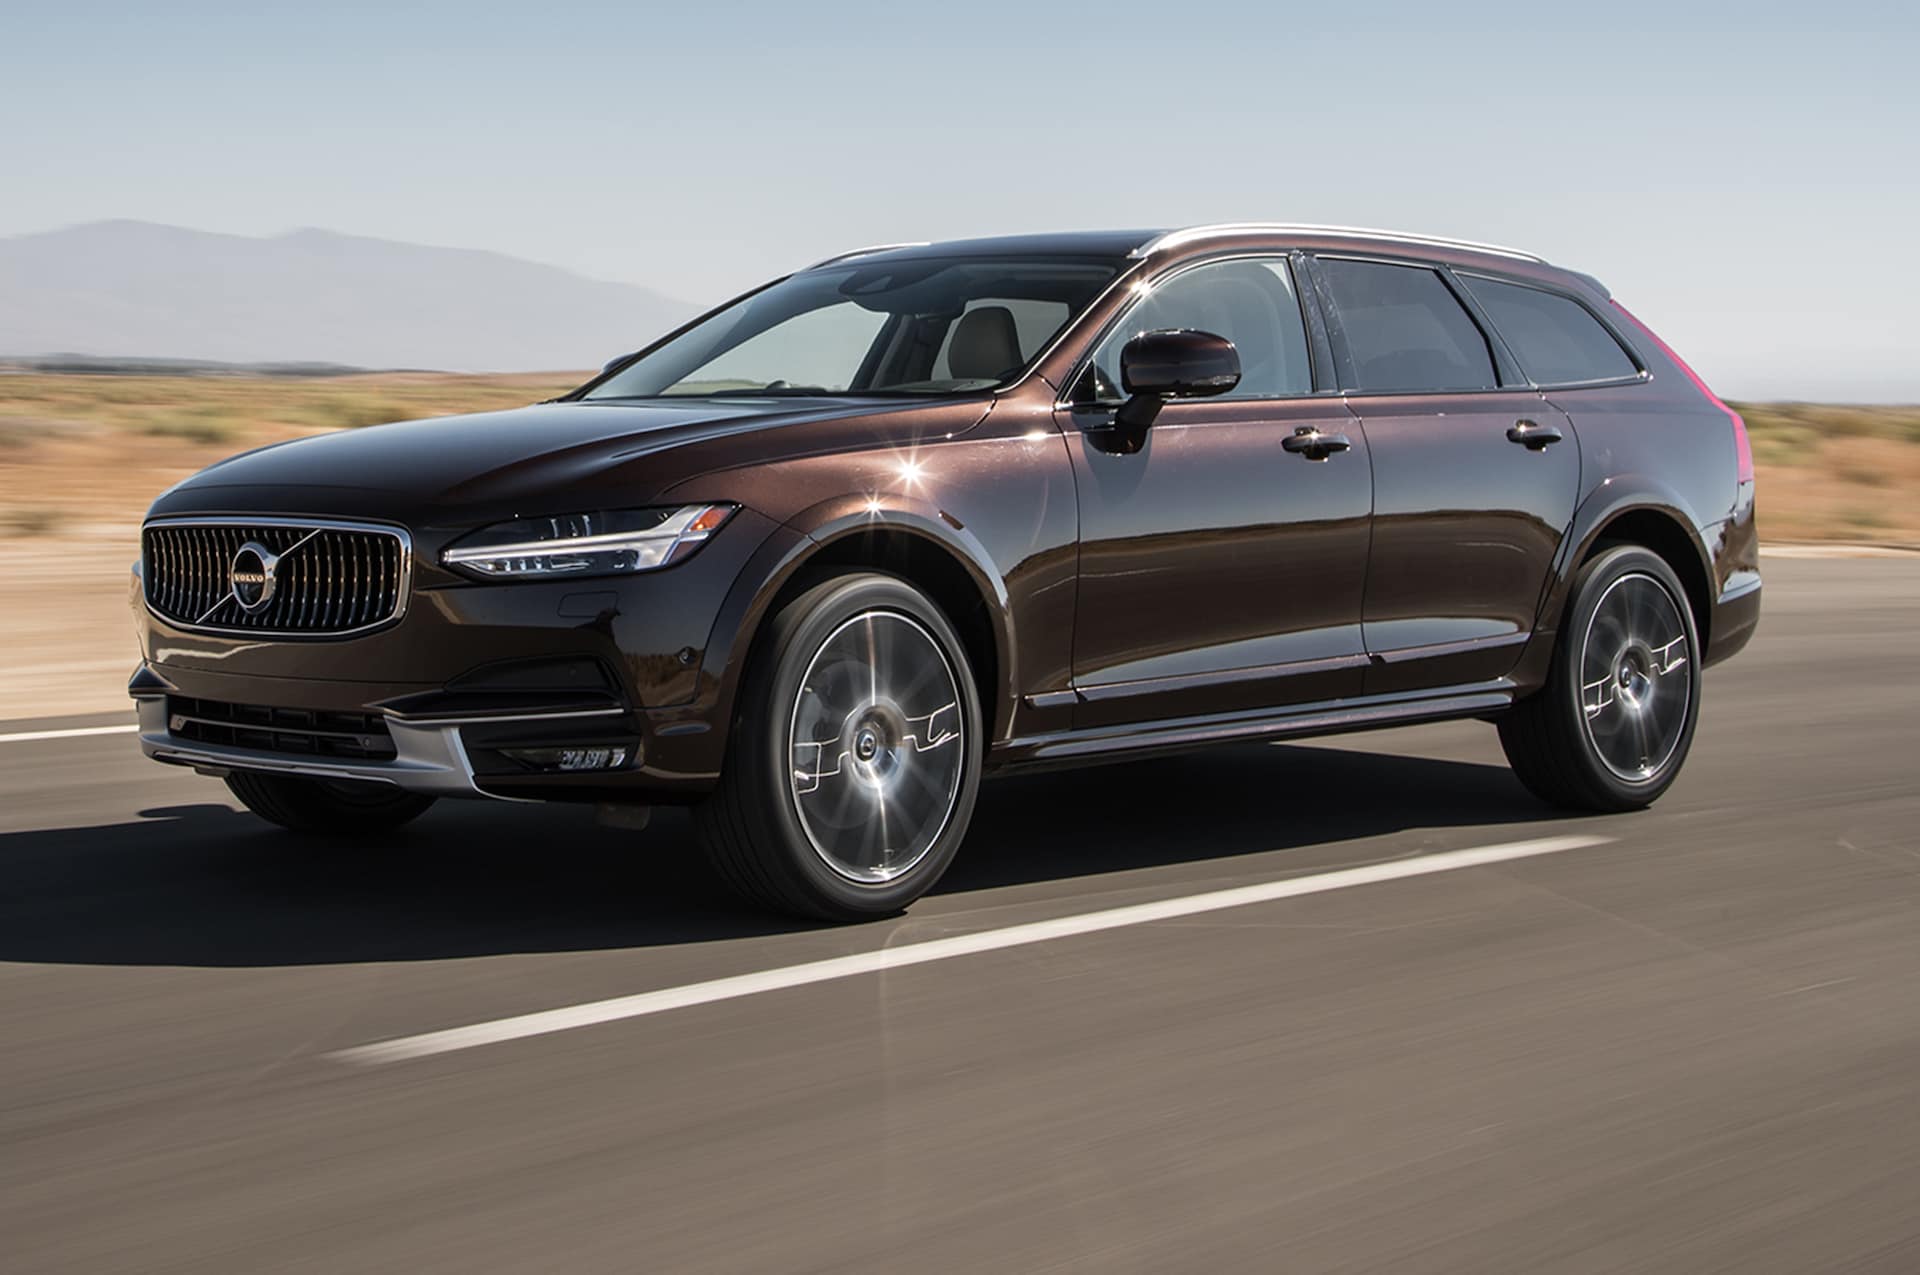 Volvo V90 Cross Country: 2018 Motor Trend SUV of the Year Contender